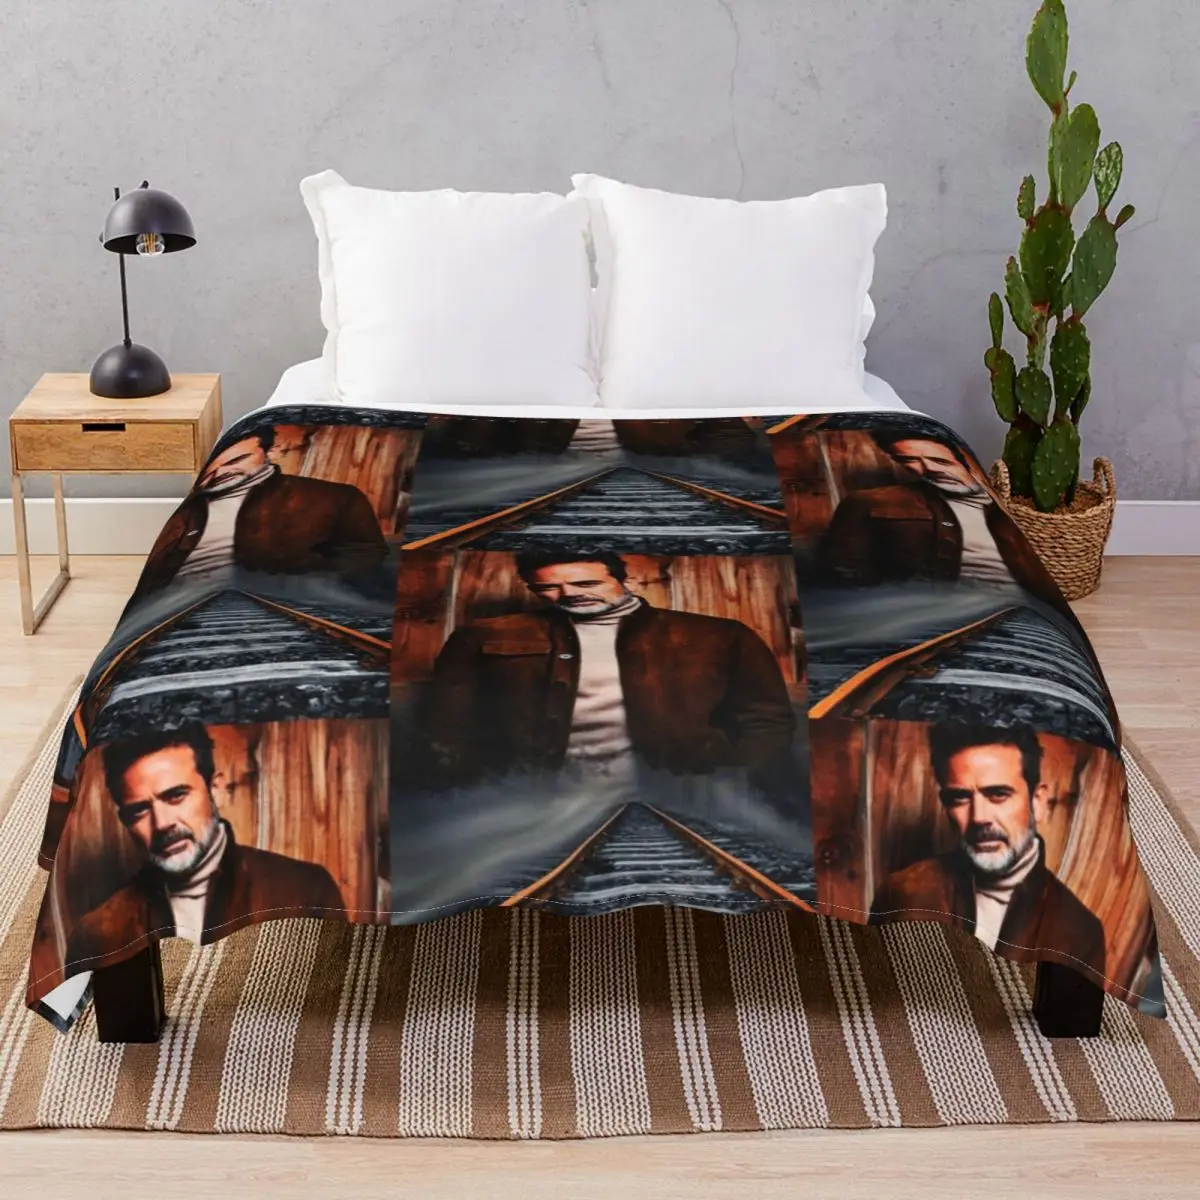 Jeffrey Dean Morgan Blanket Flannel Plush Decoration Soft Throw Blankets for Bed Home Couch Travel Cinema